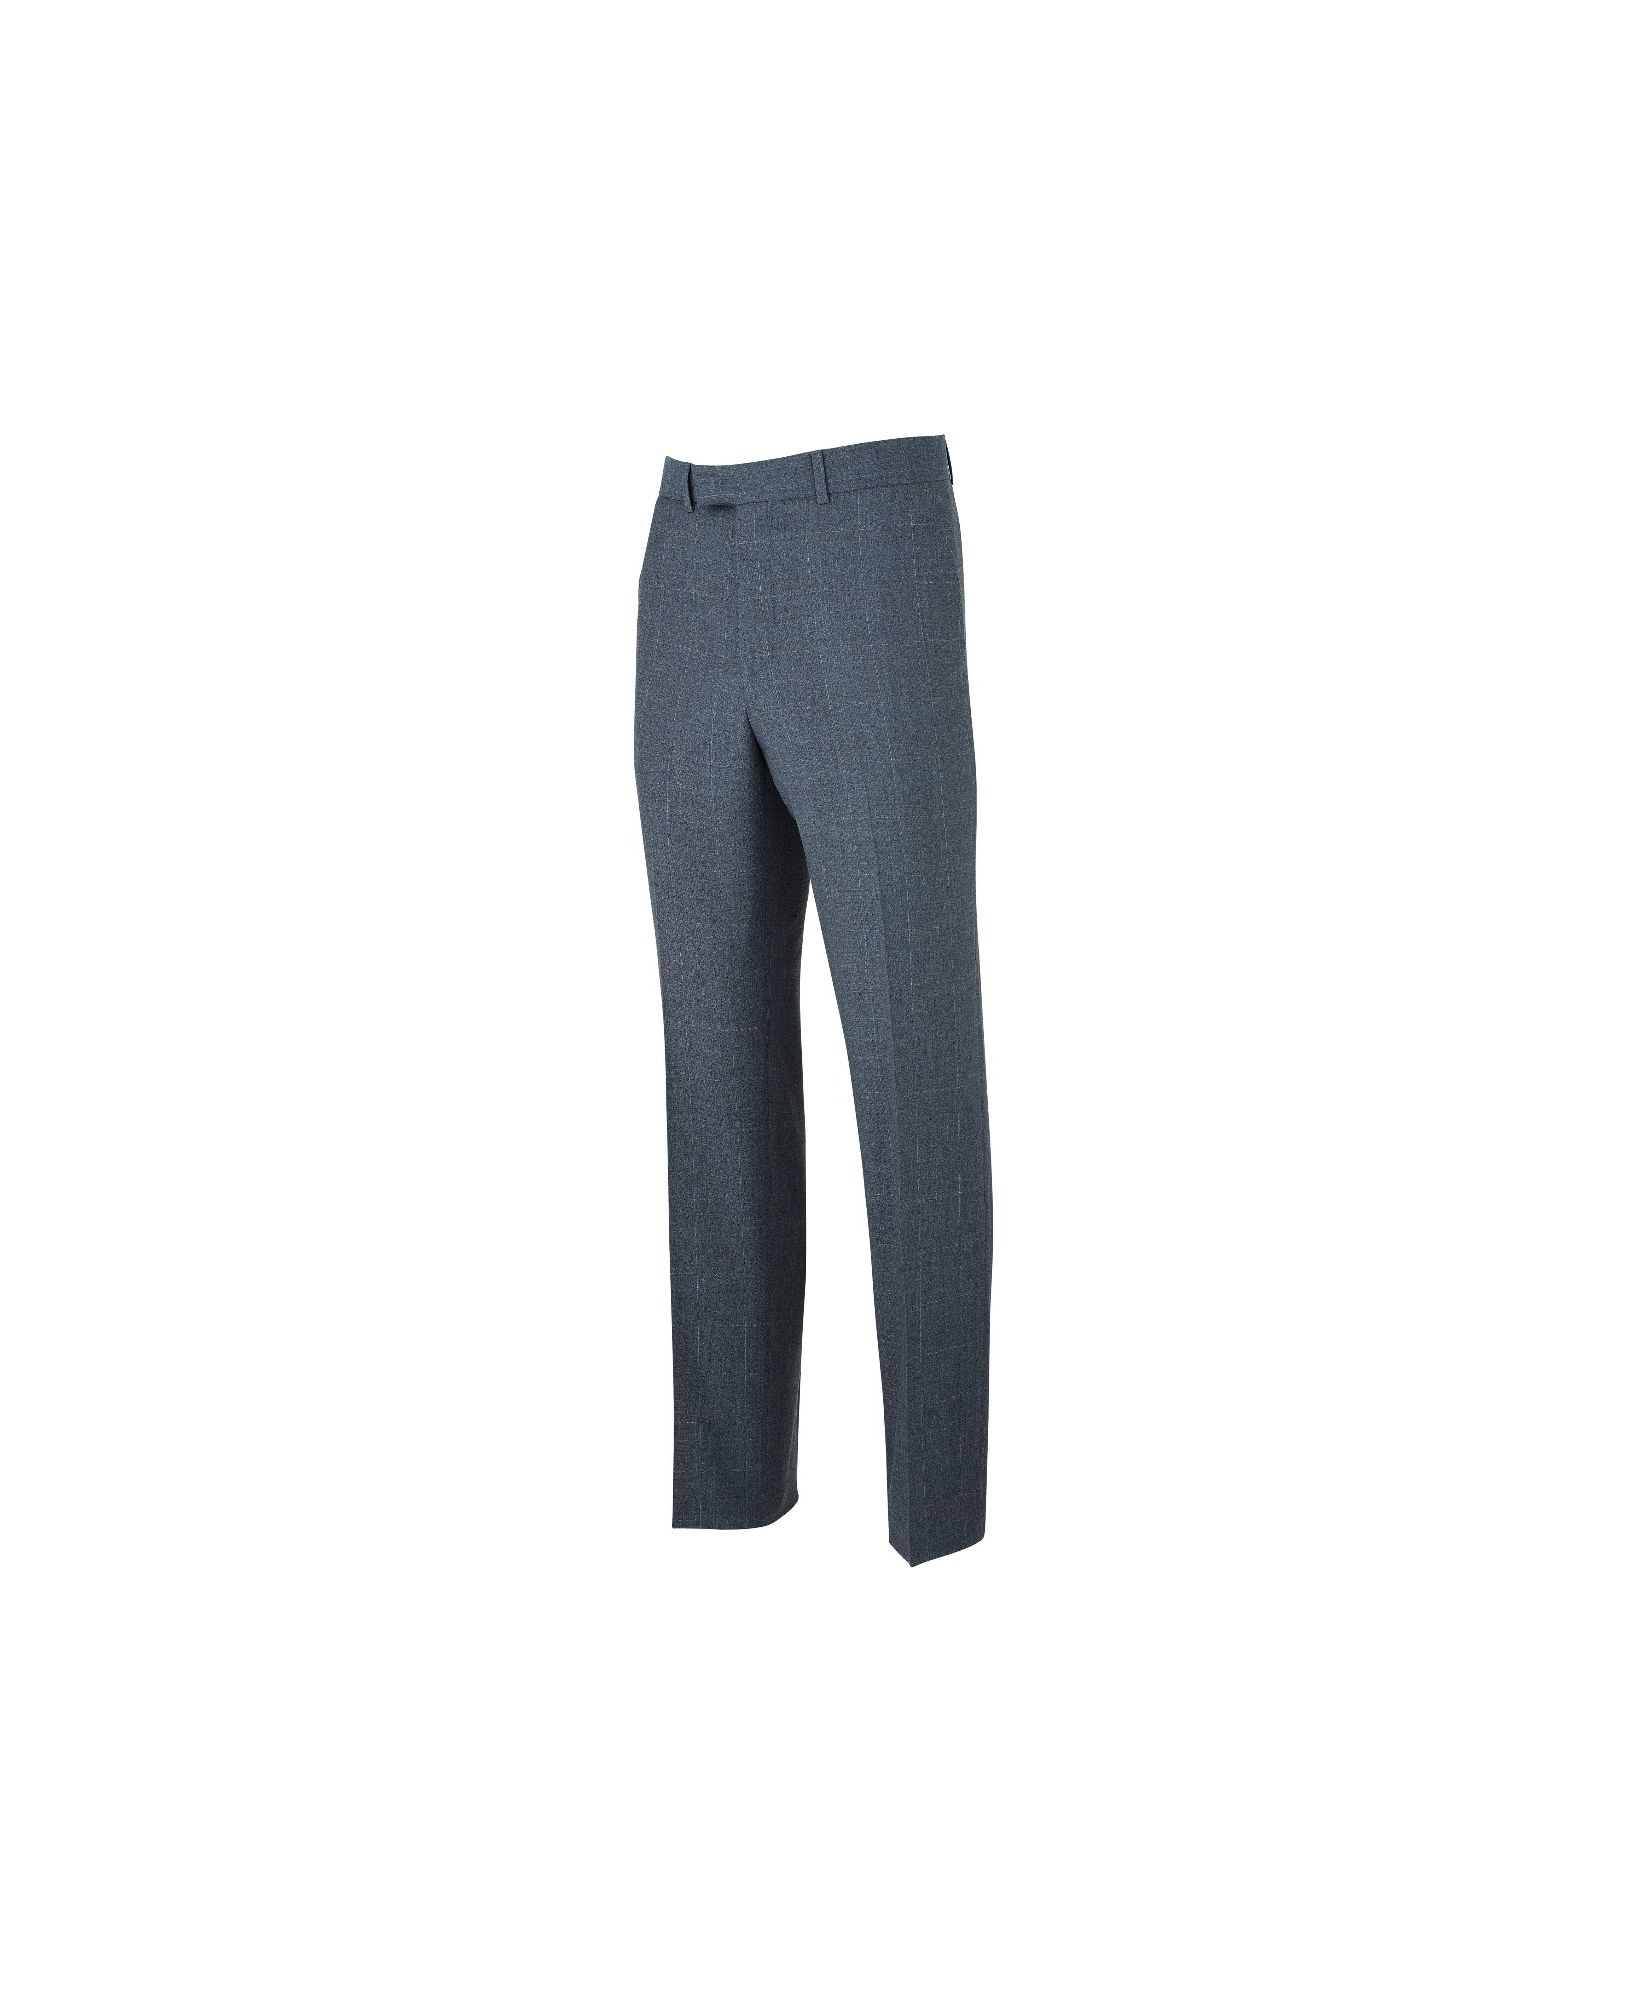 Grey Check Suit Trousers 32